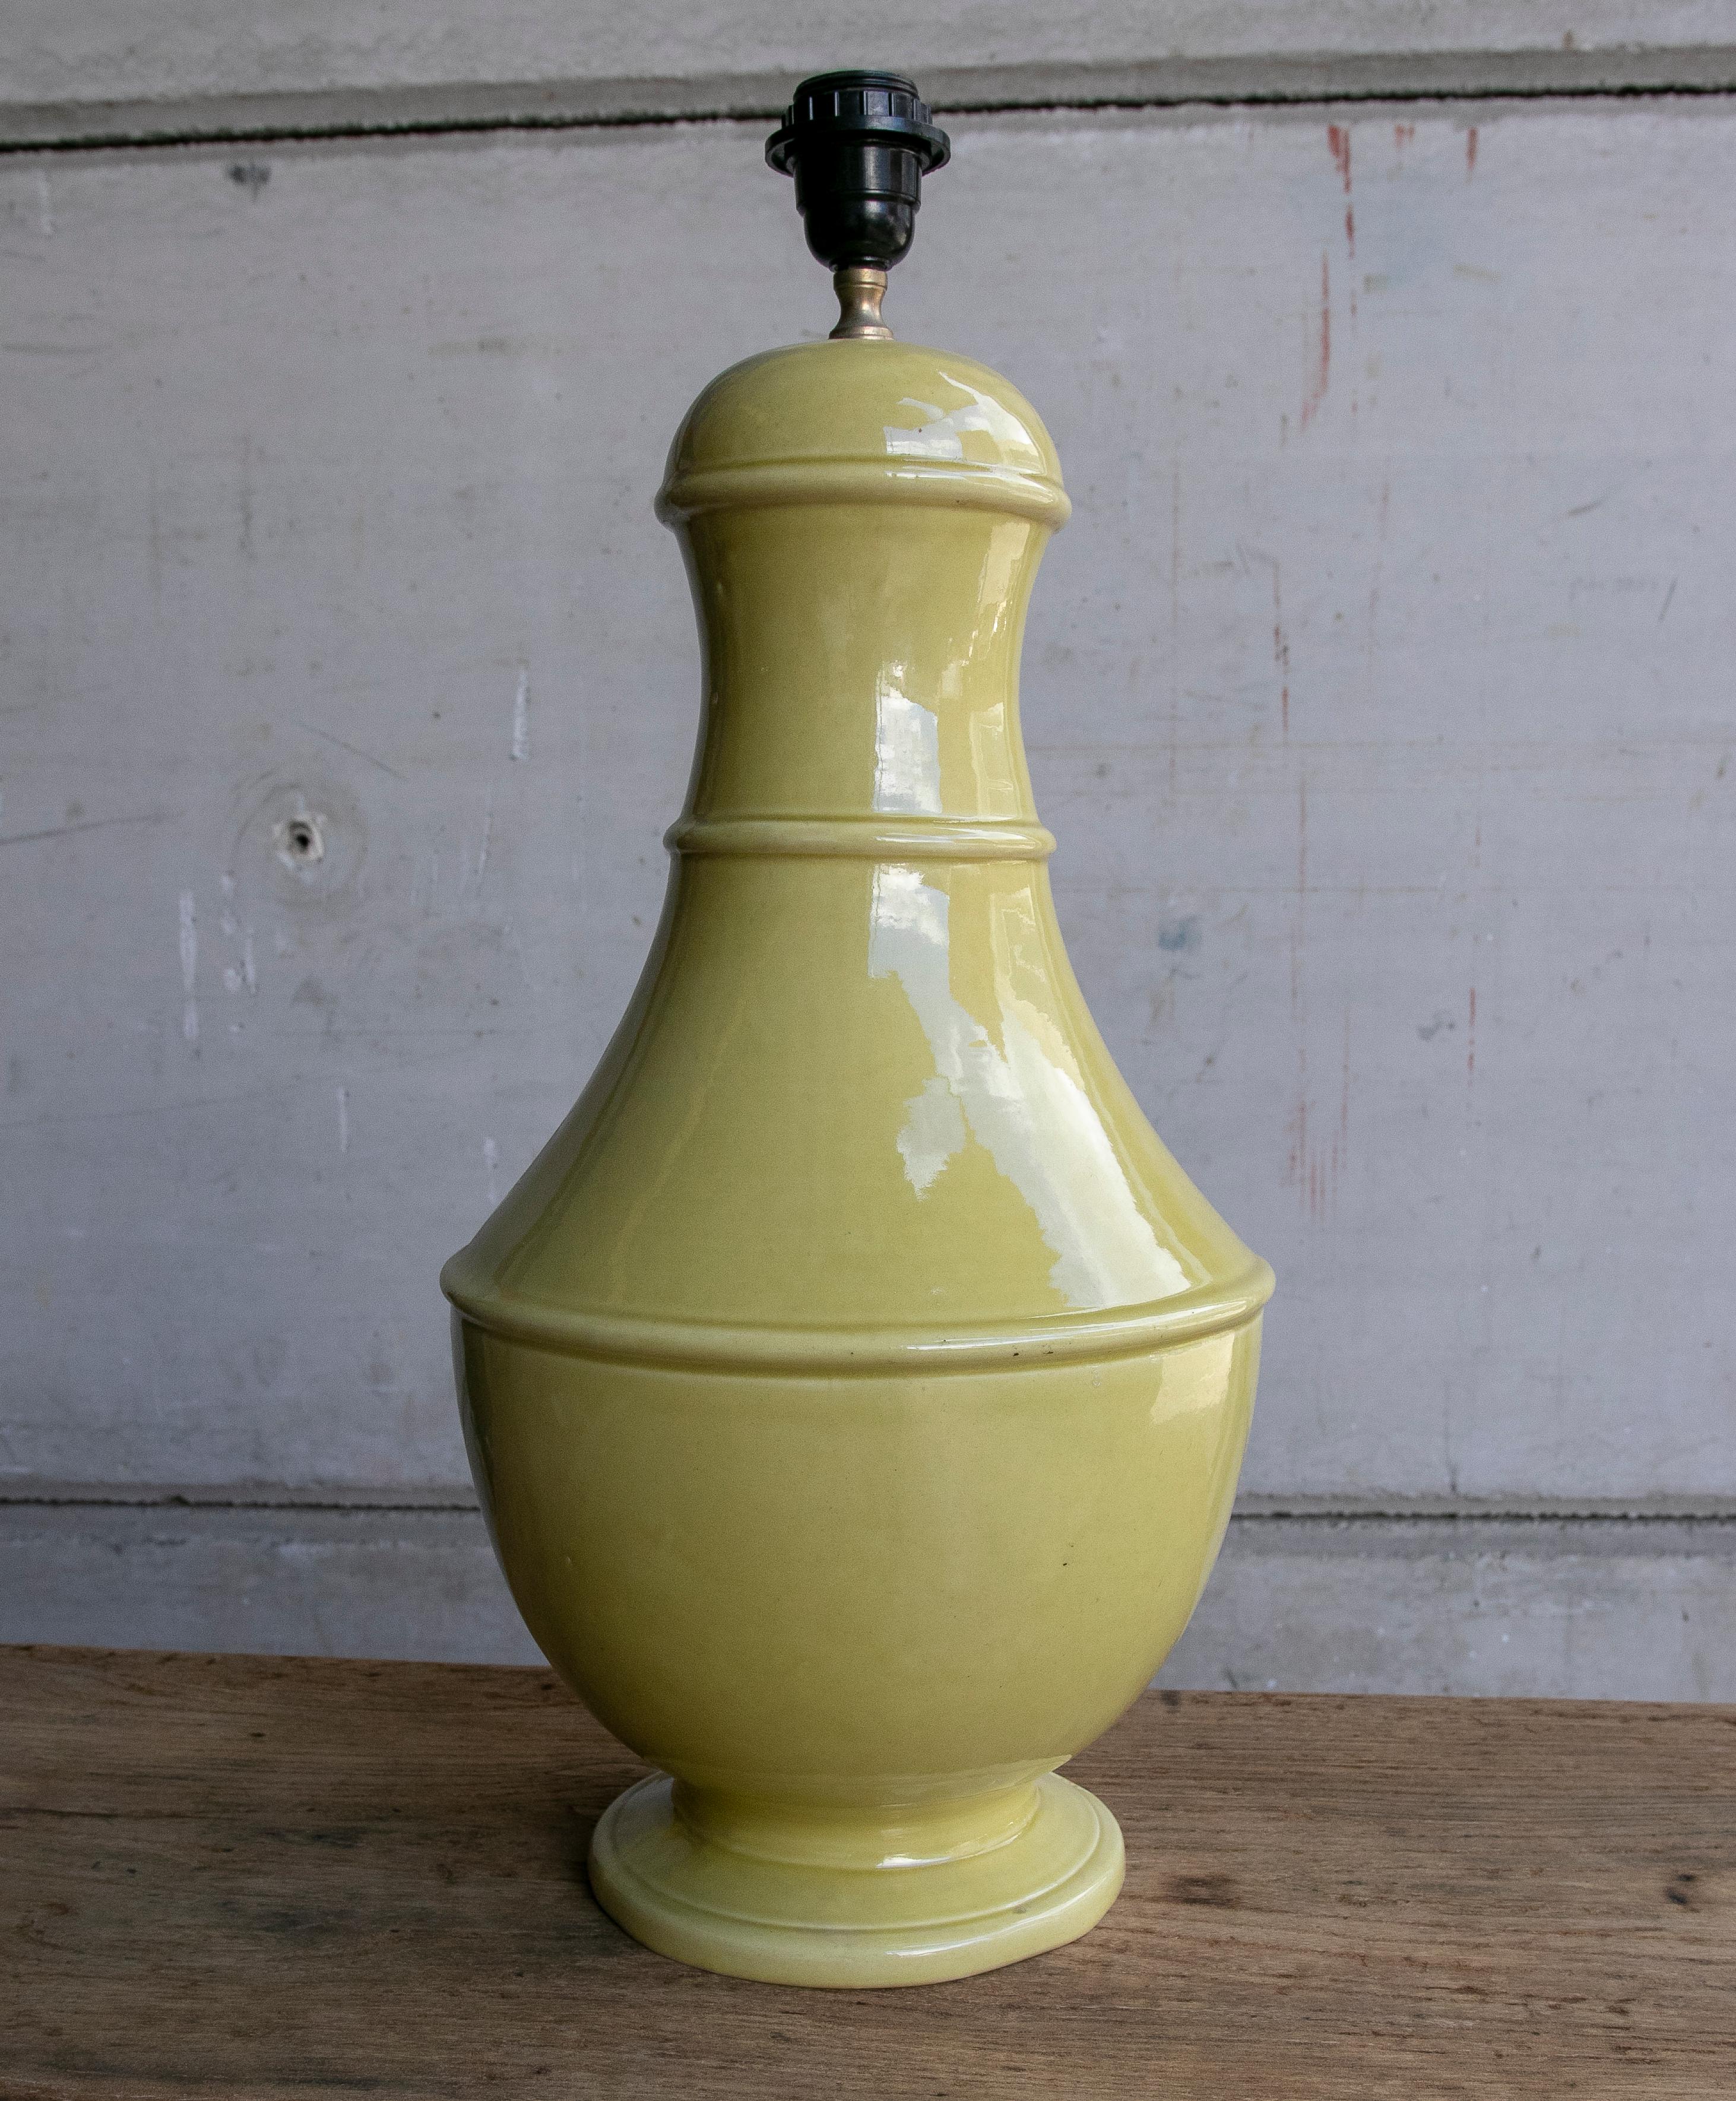 1980s Ceramic table lamp in green olive colour.